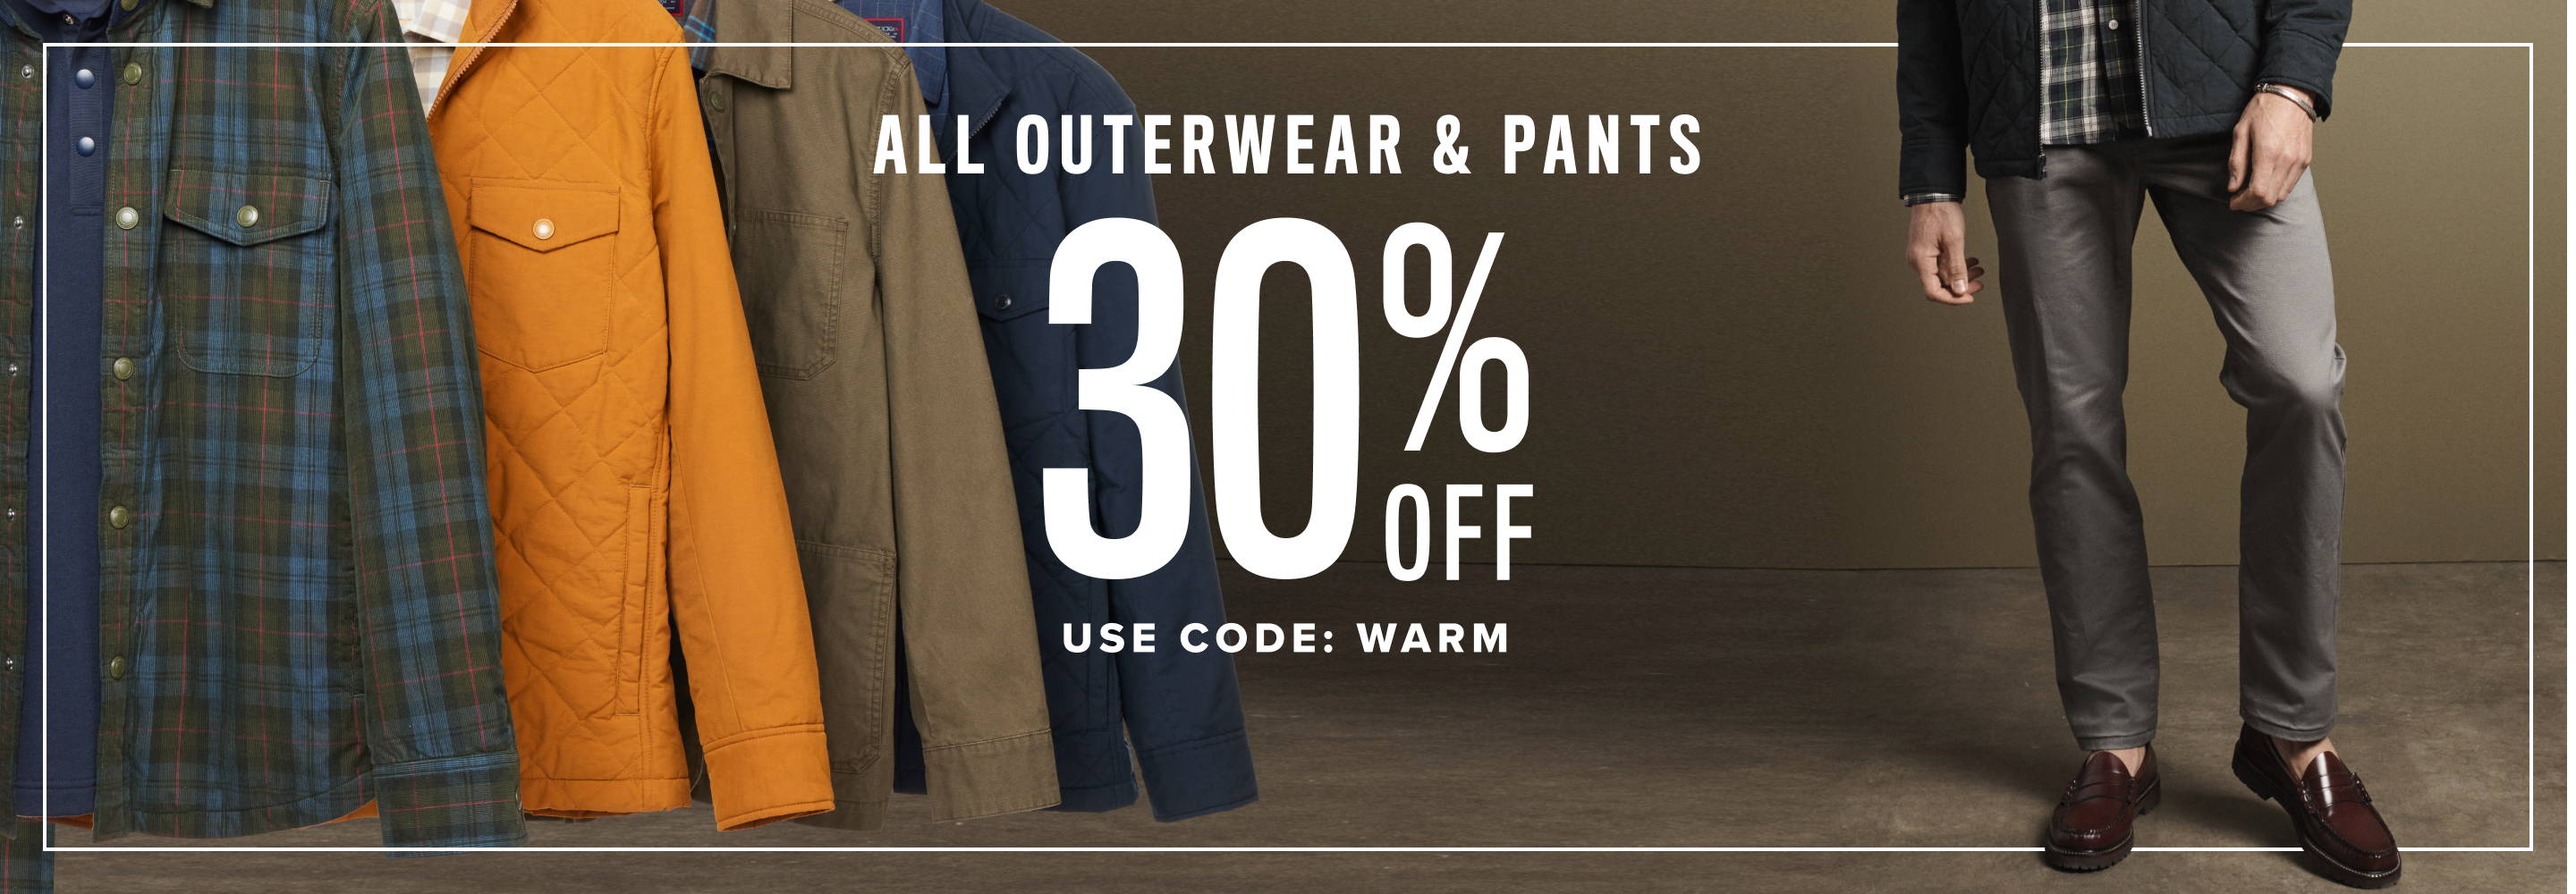 All Outerwear & Pants 30% Off. Use code: WARM30